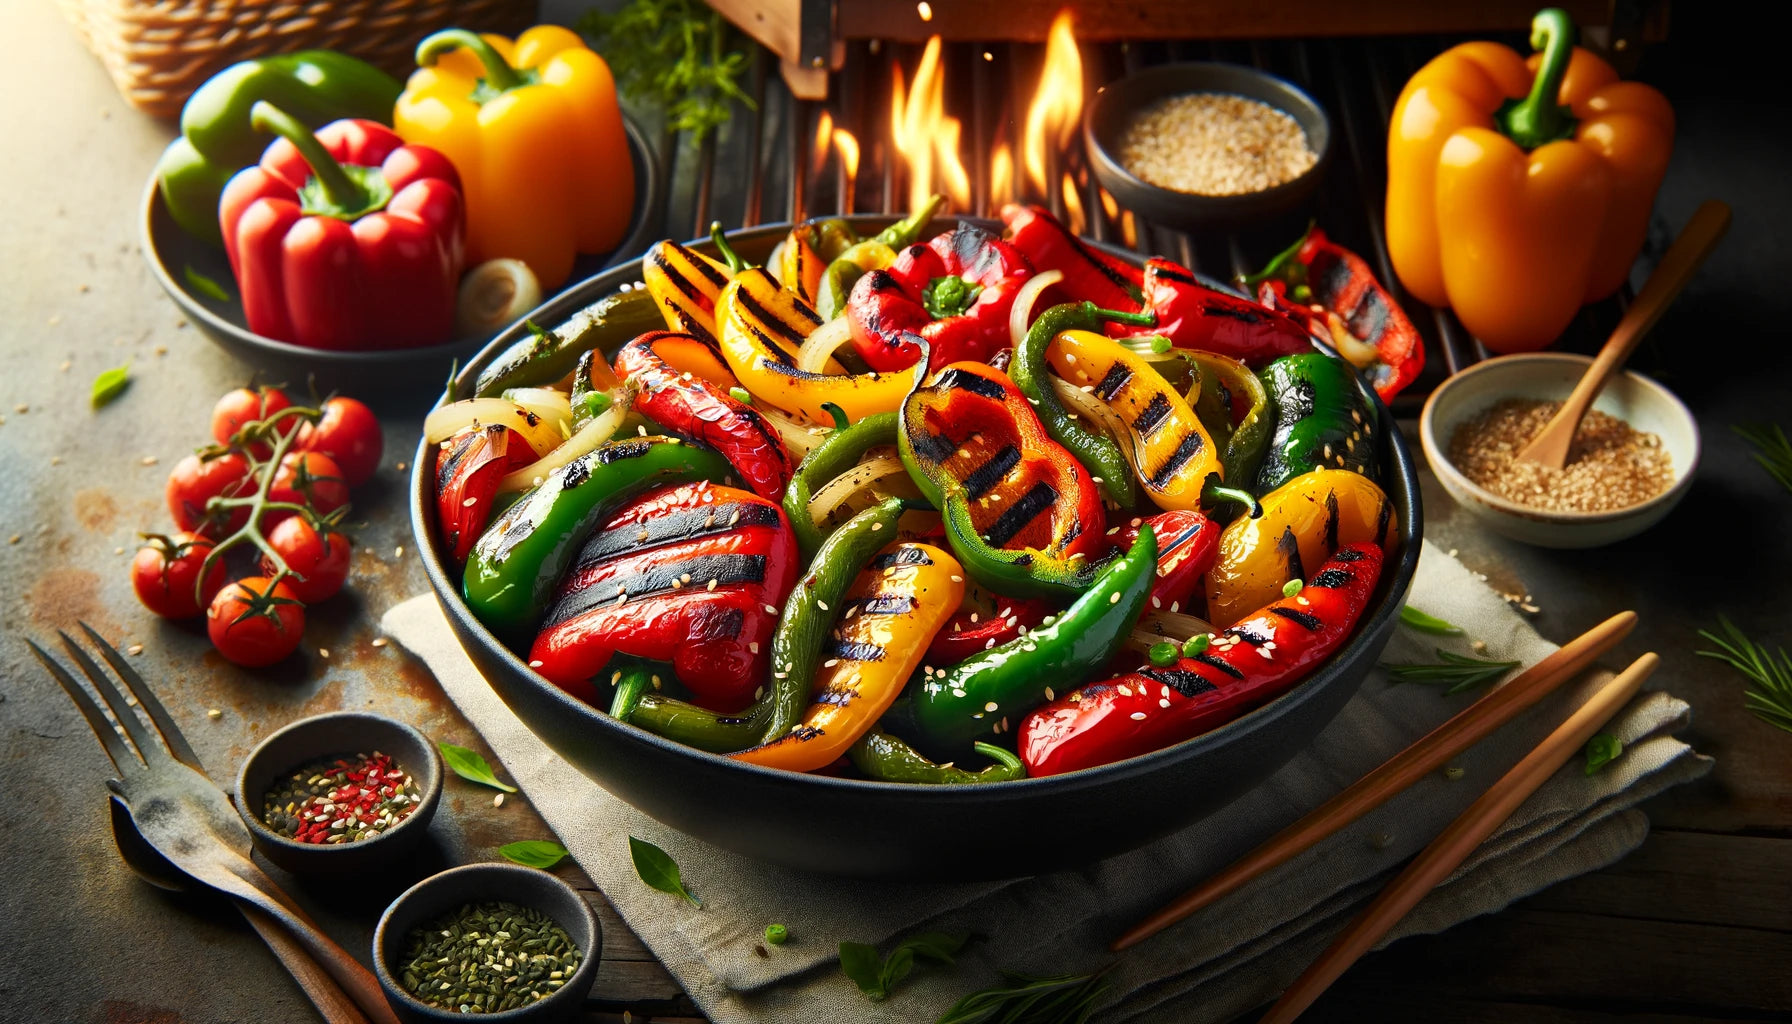 Sweet Pepper Stir Fry Recipe: A Perfect Arteflame Grill Side Dish